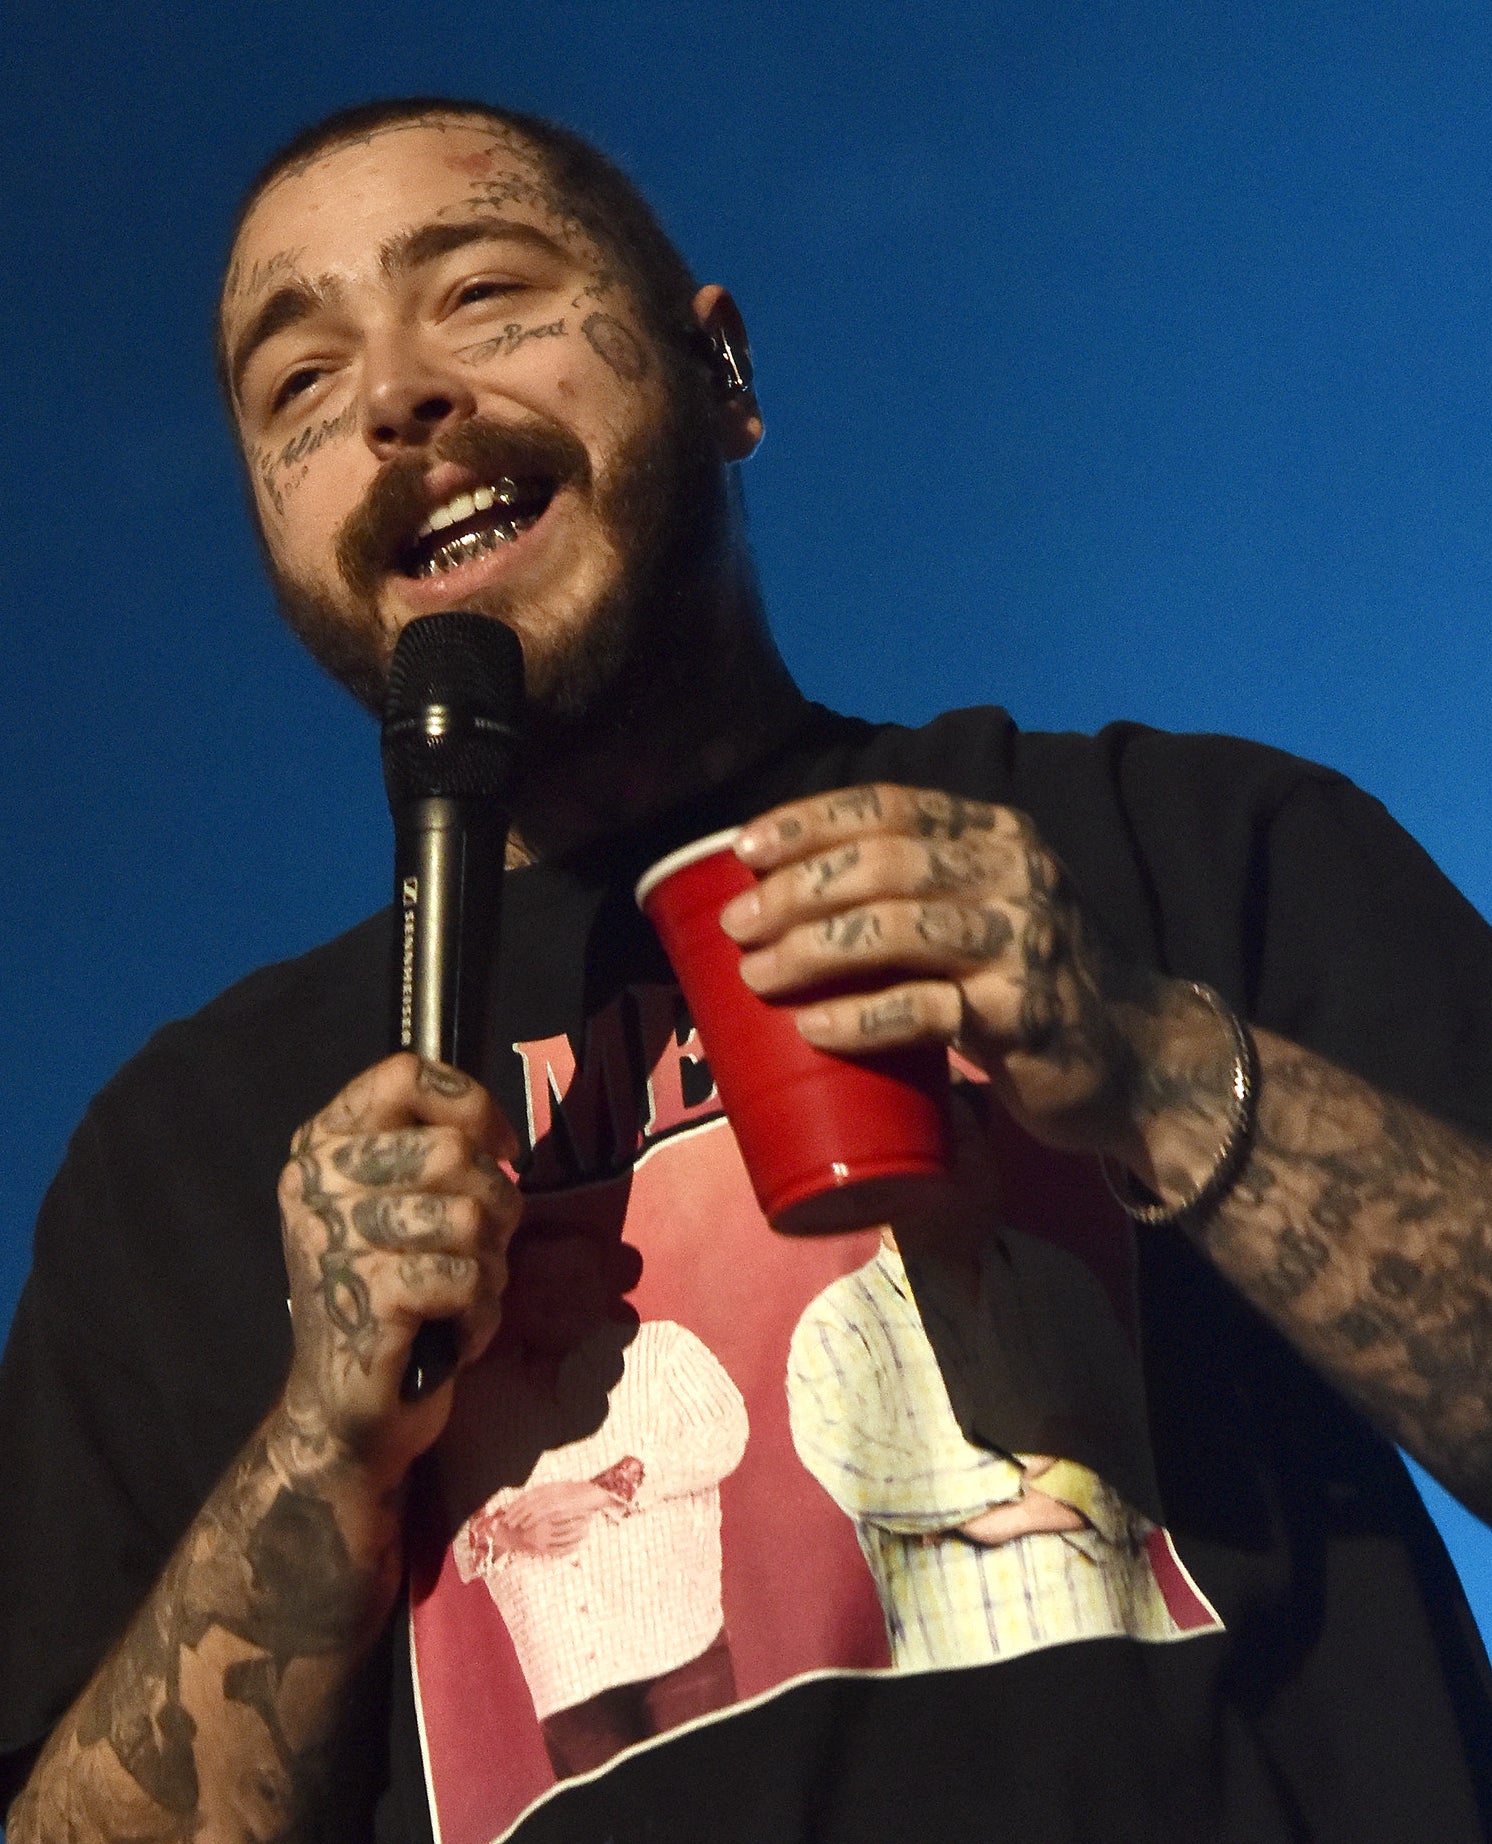 Post Malone onstage